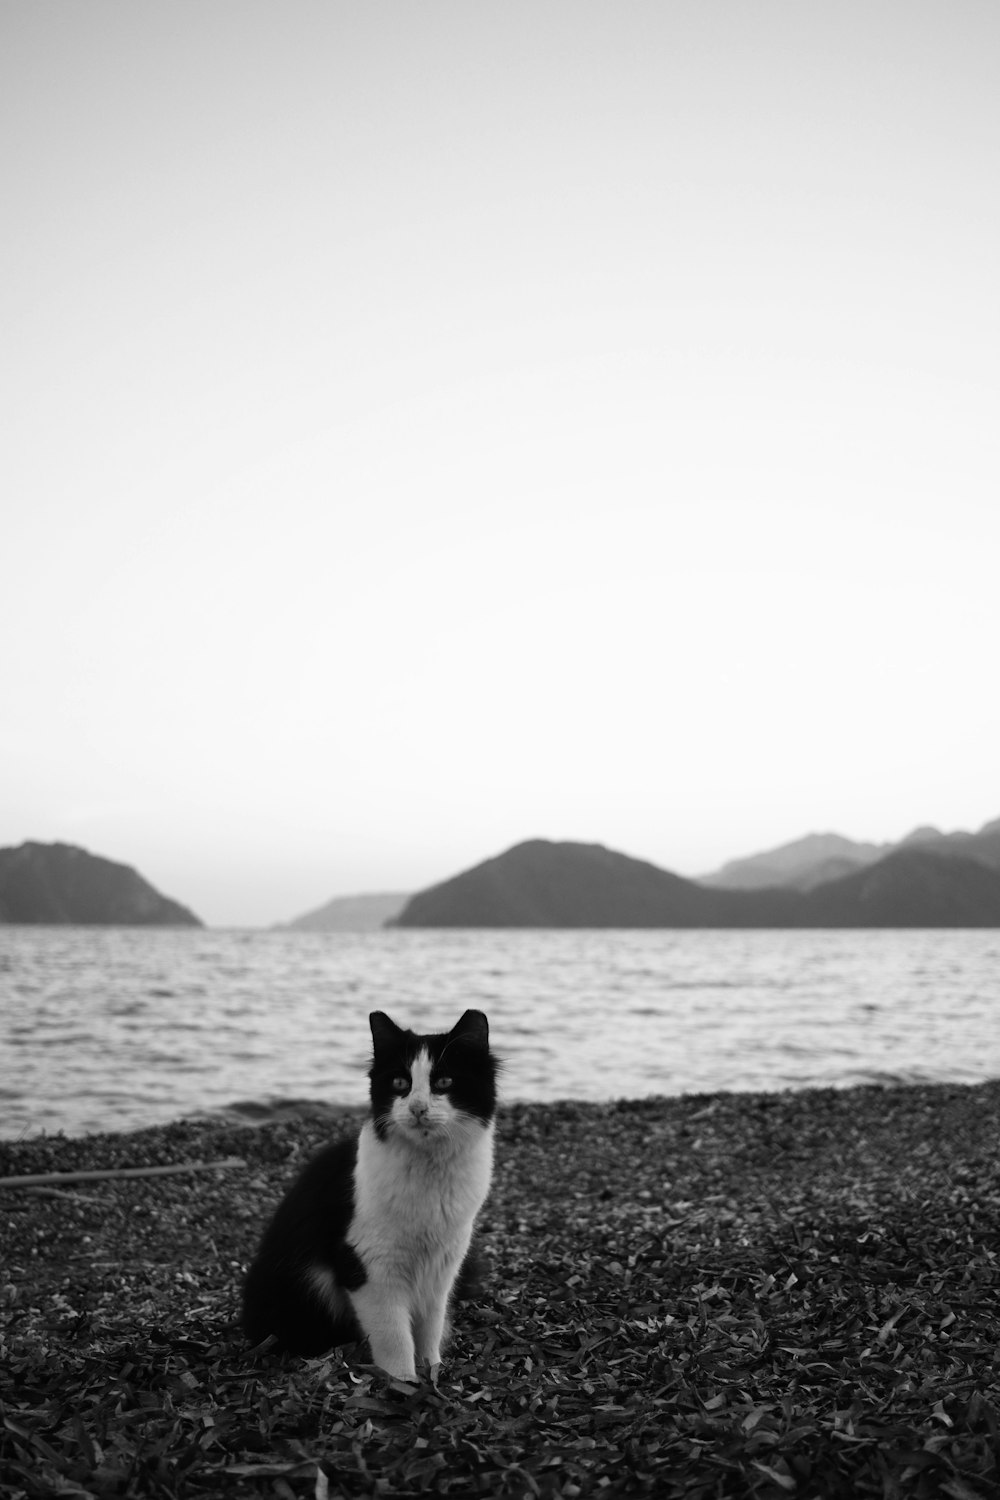 a black and white cat sitting on top of a beach